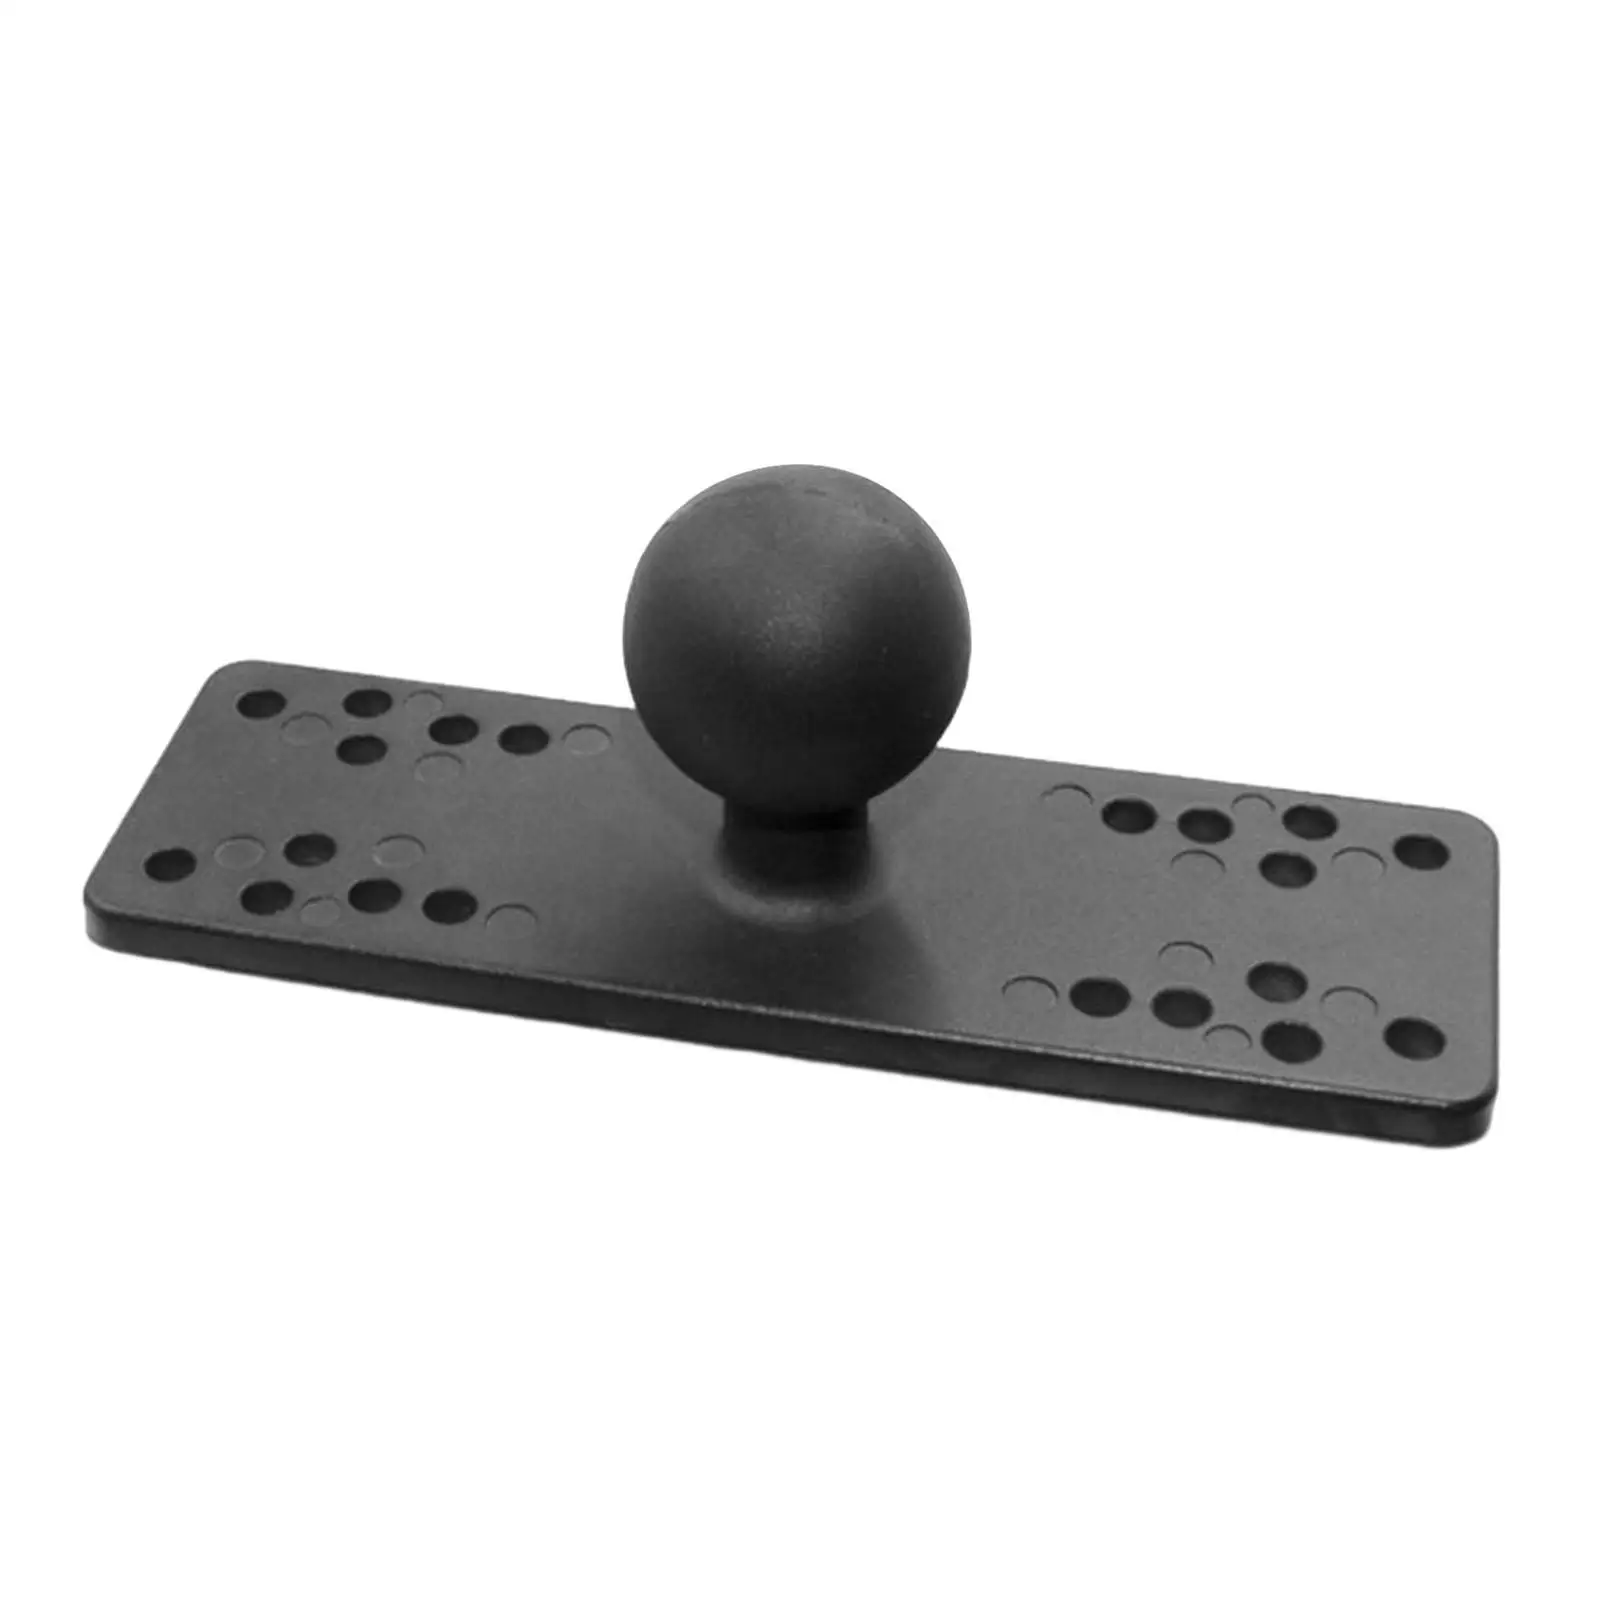 Marine Electronic Plate with 38.1mm/1.50inch Ball Durable Adjustable Angles